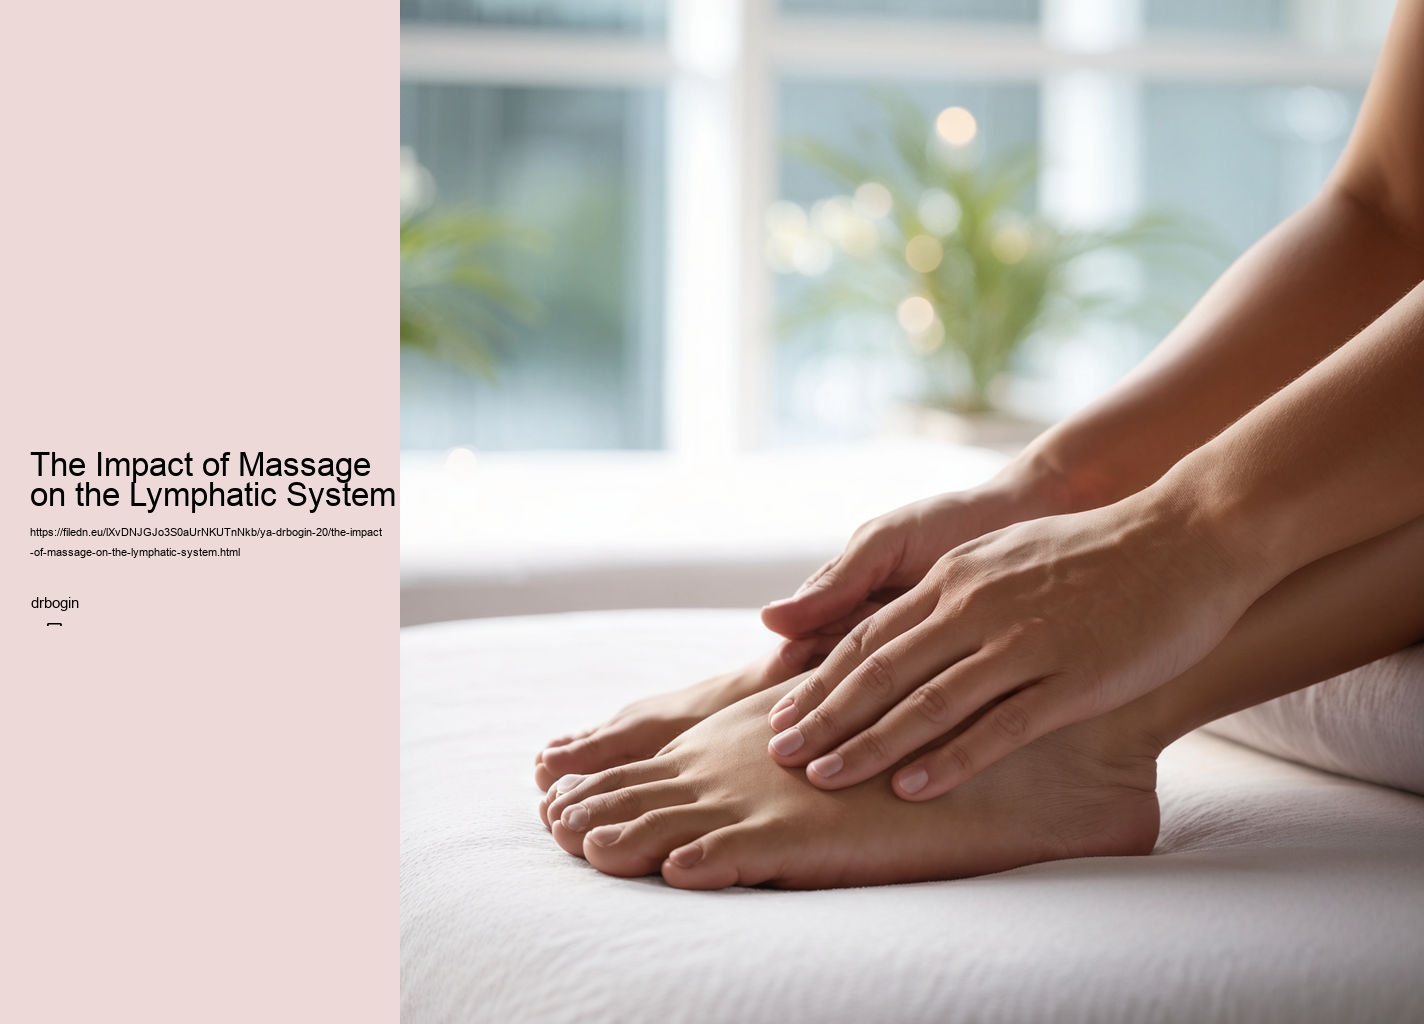 The Impact of Massage on the Lymphatic System